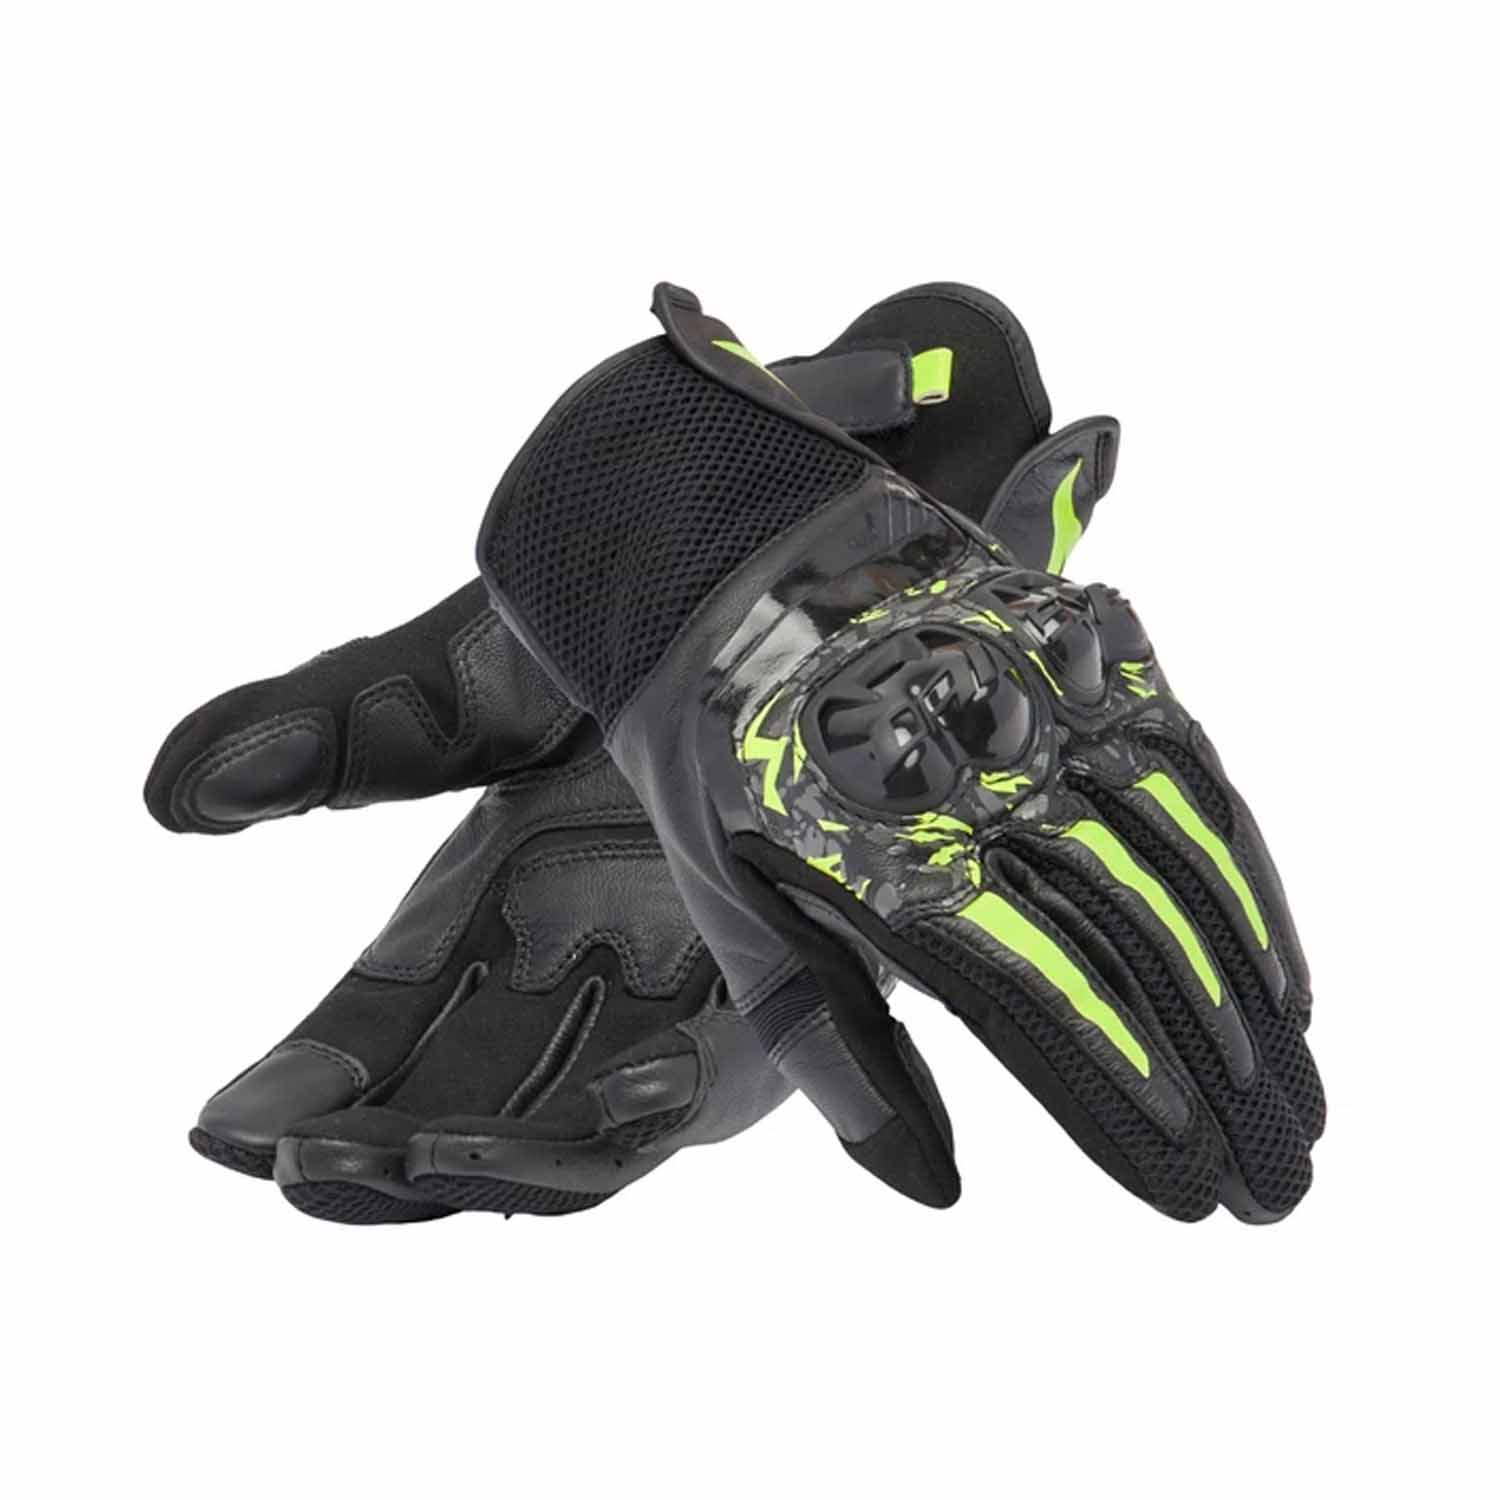 Image of Dainese MIG 3 Gloves Black Anthracite Yellow Fluo Größe S